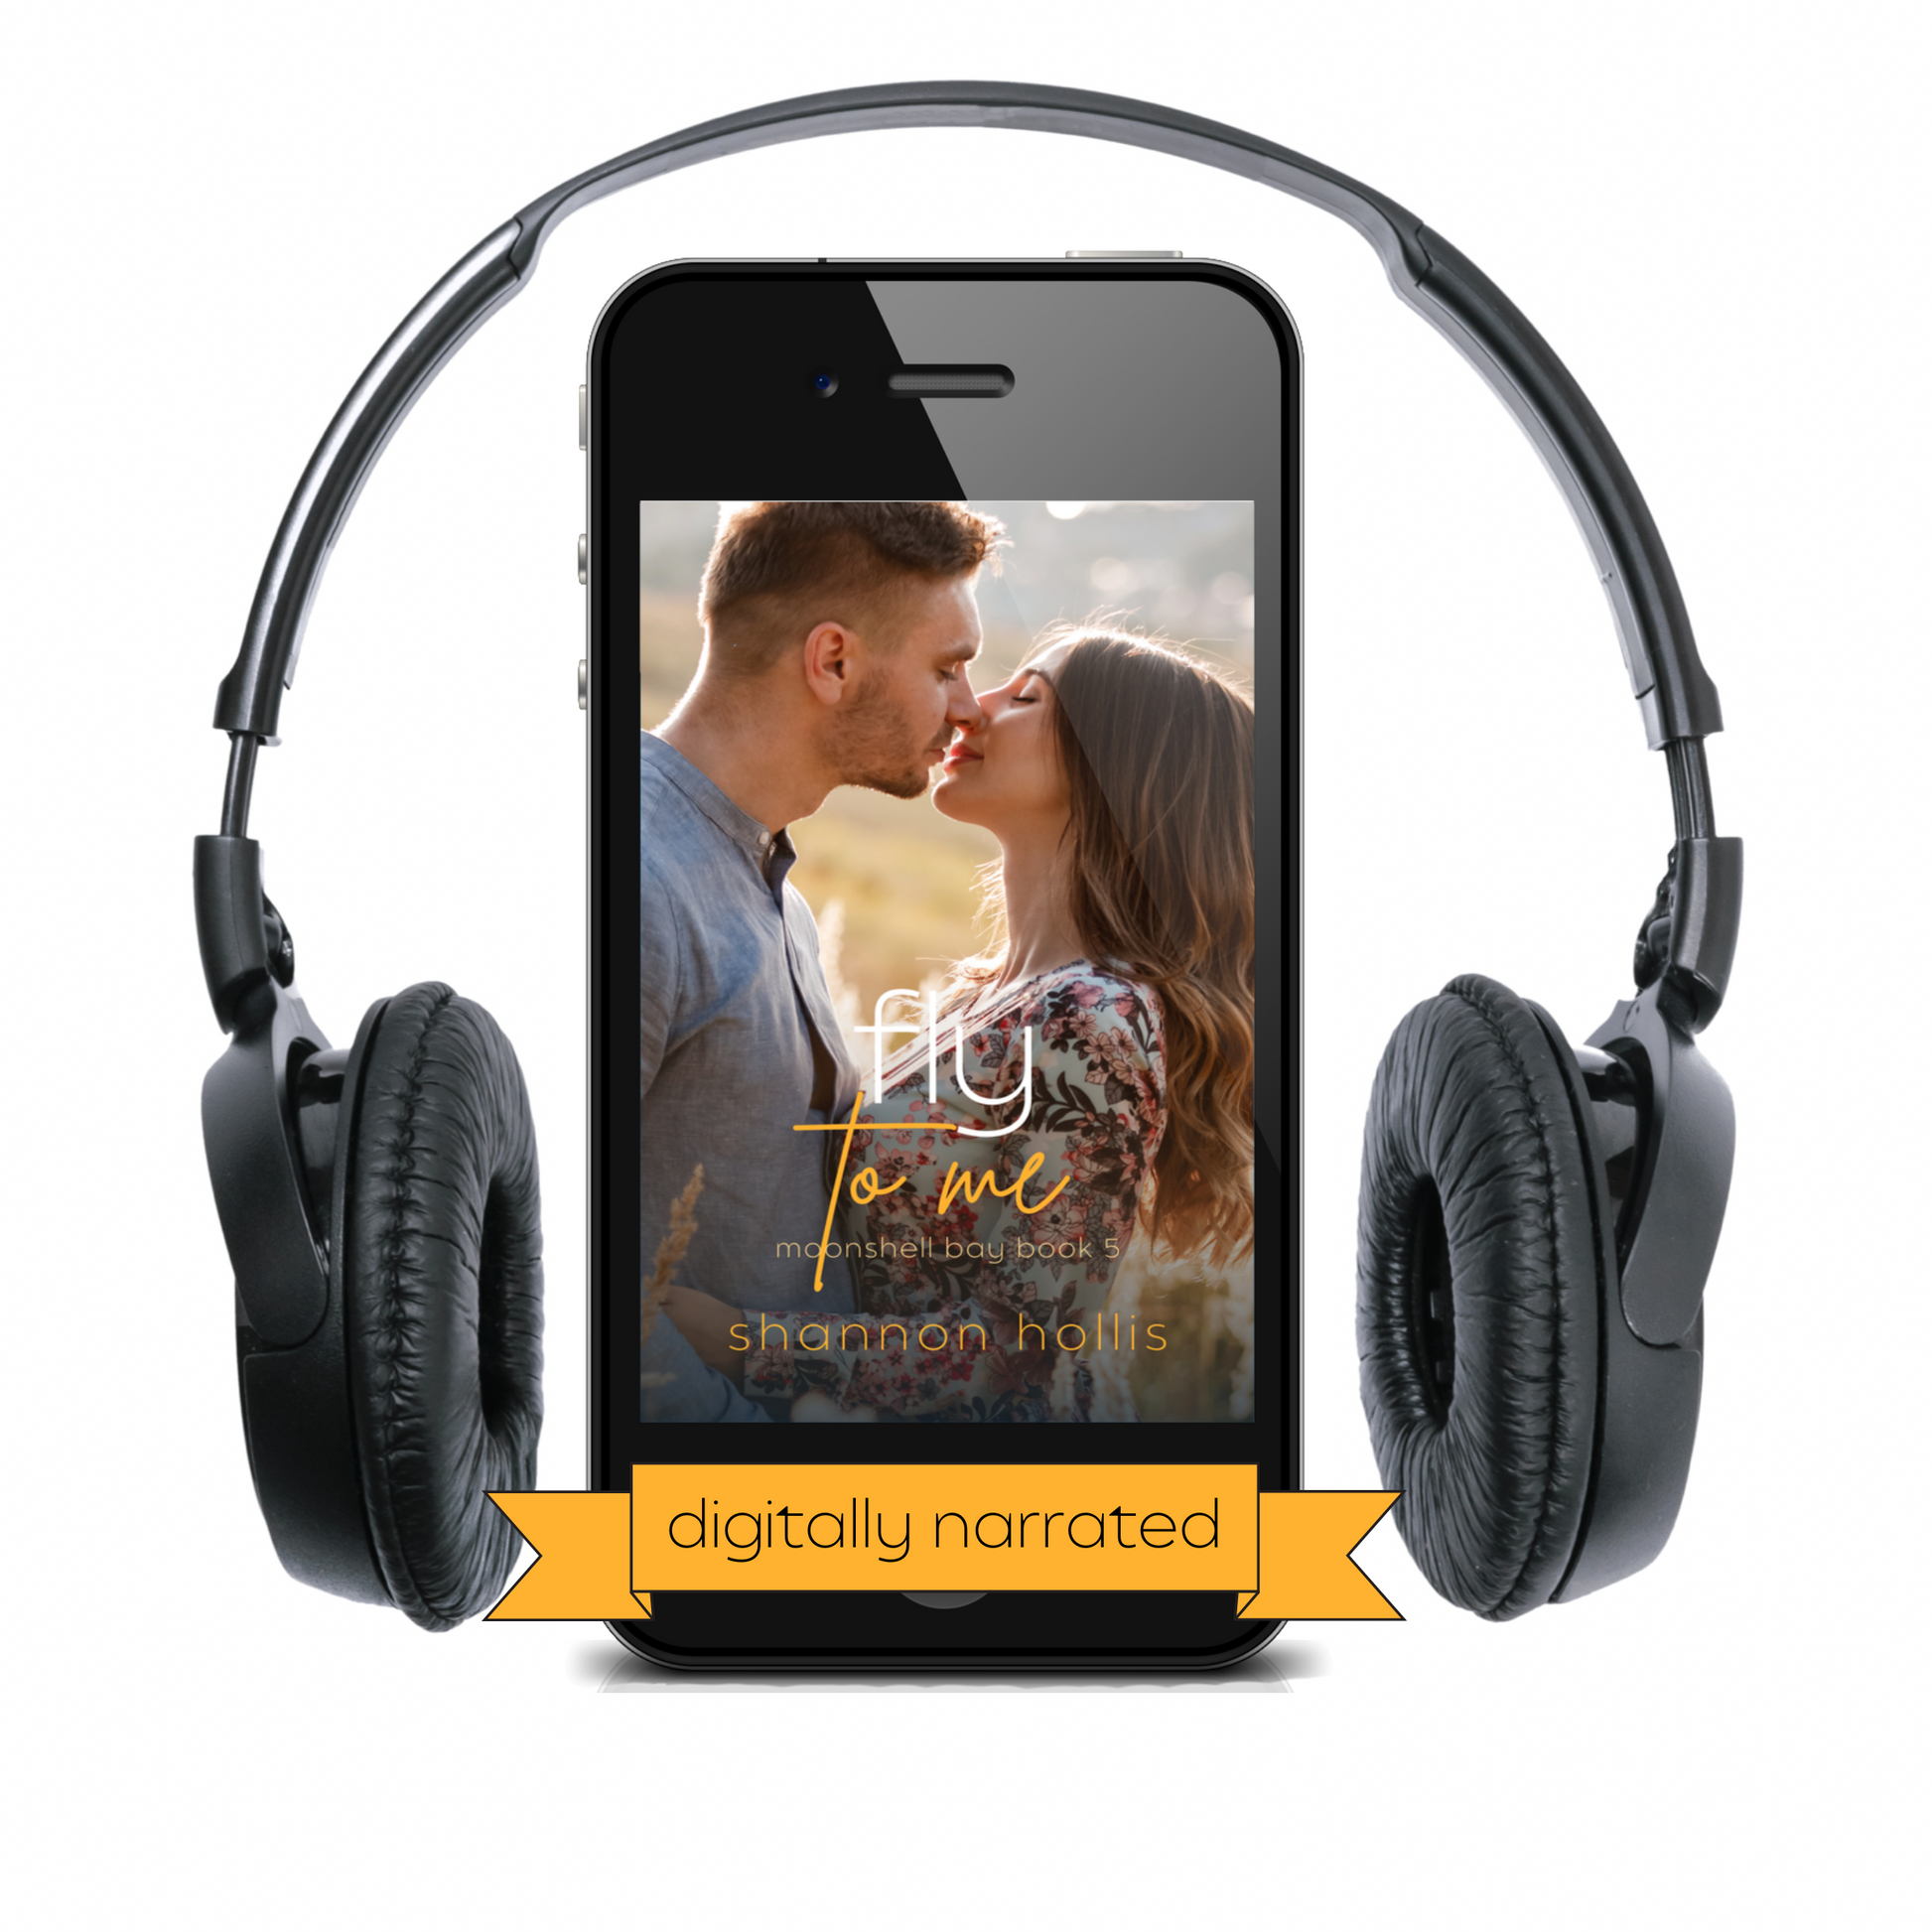 Fly to Me, a digitally narrated audiobook written by Shannon Hollis